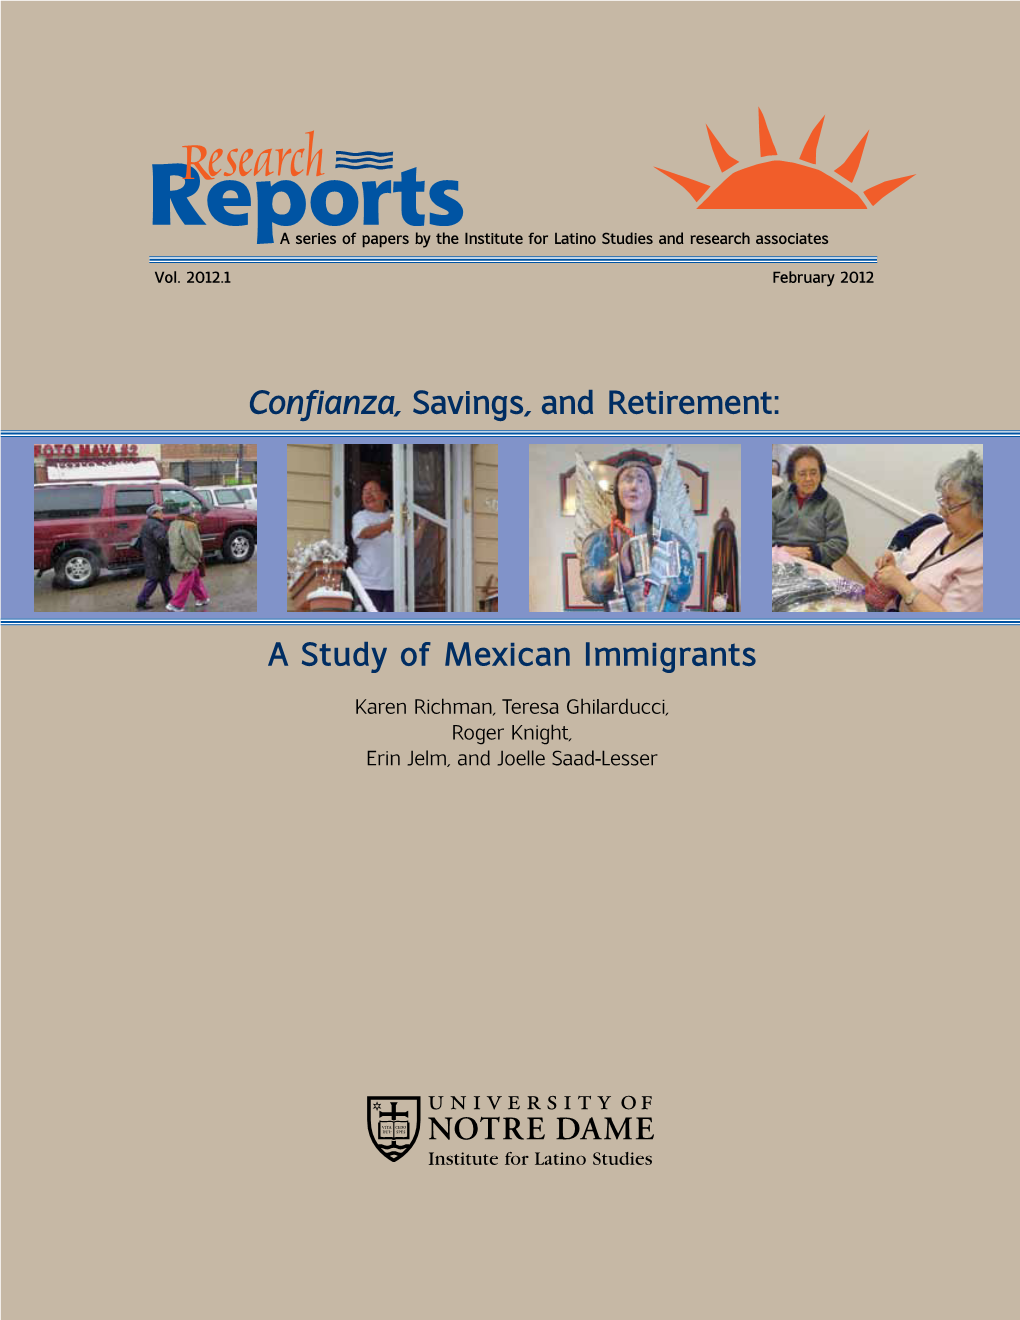 Confianza, Savings, and Retirement: a Study of Mexican Immigrants